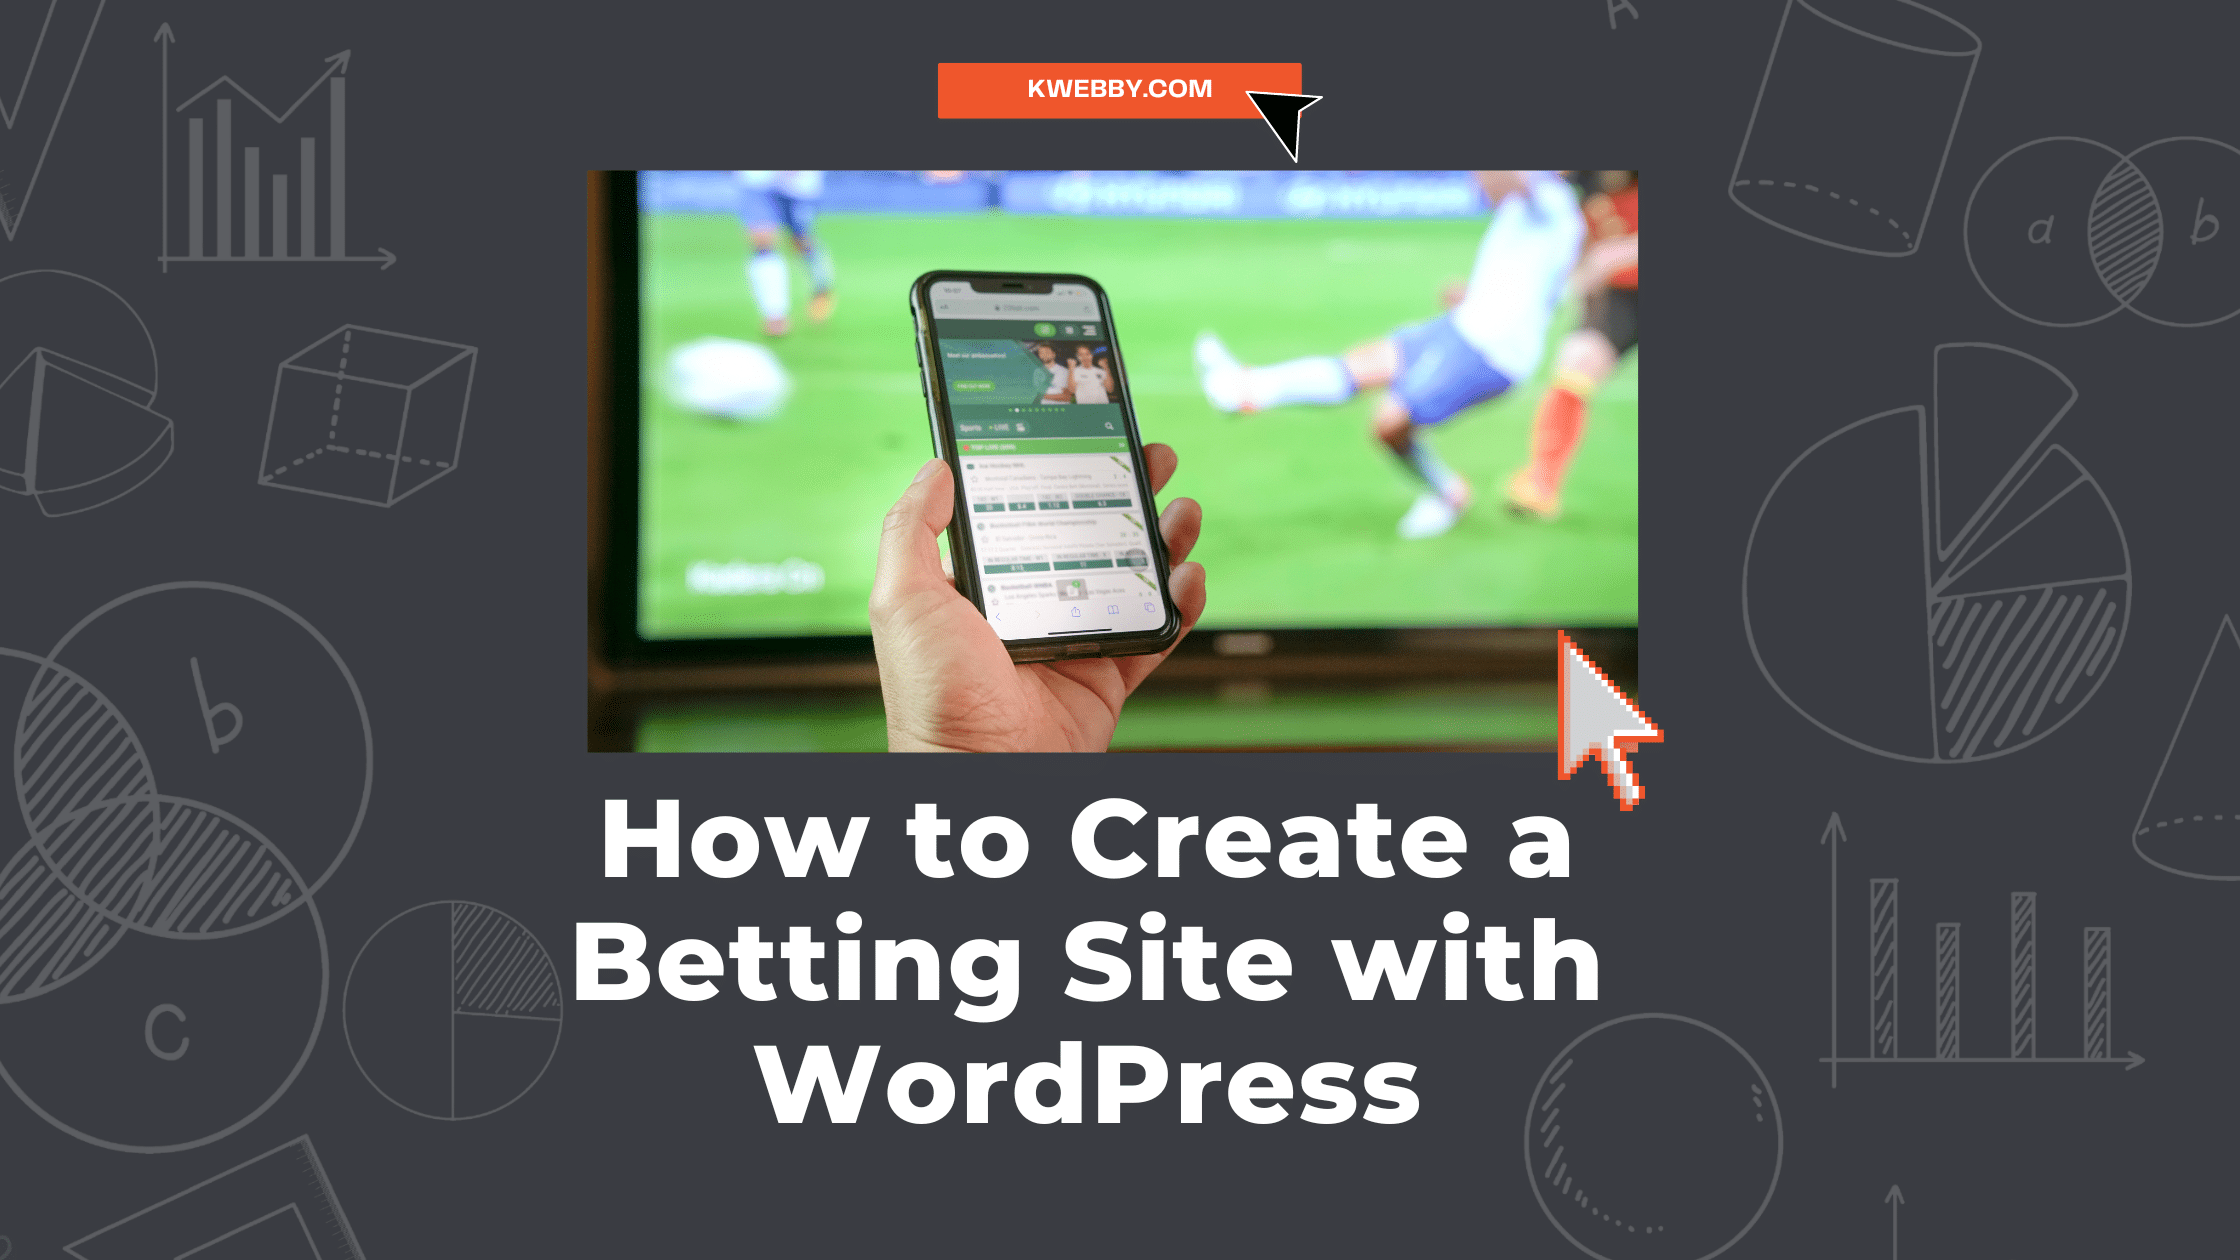 How to Create a Betting Site with WordPress